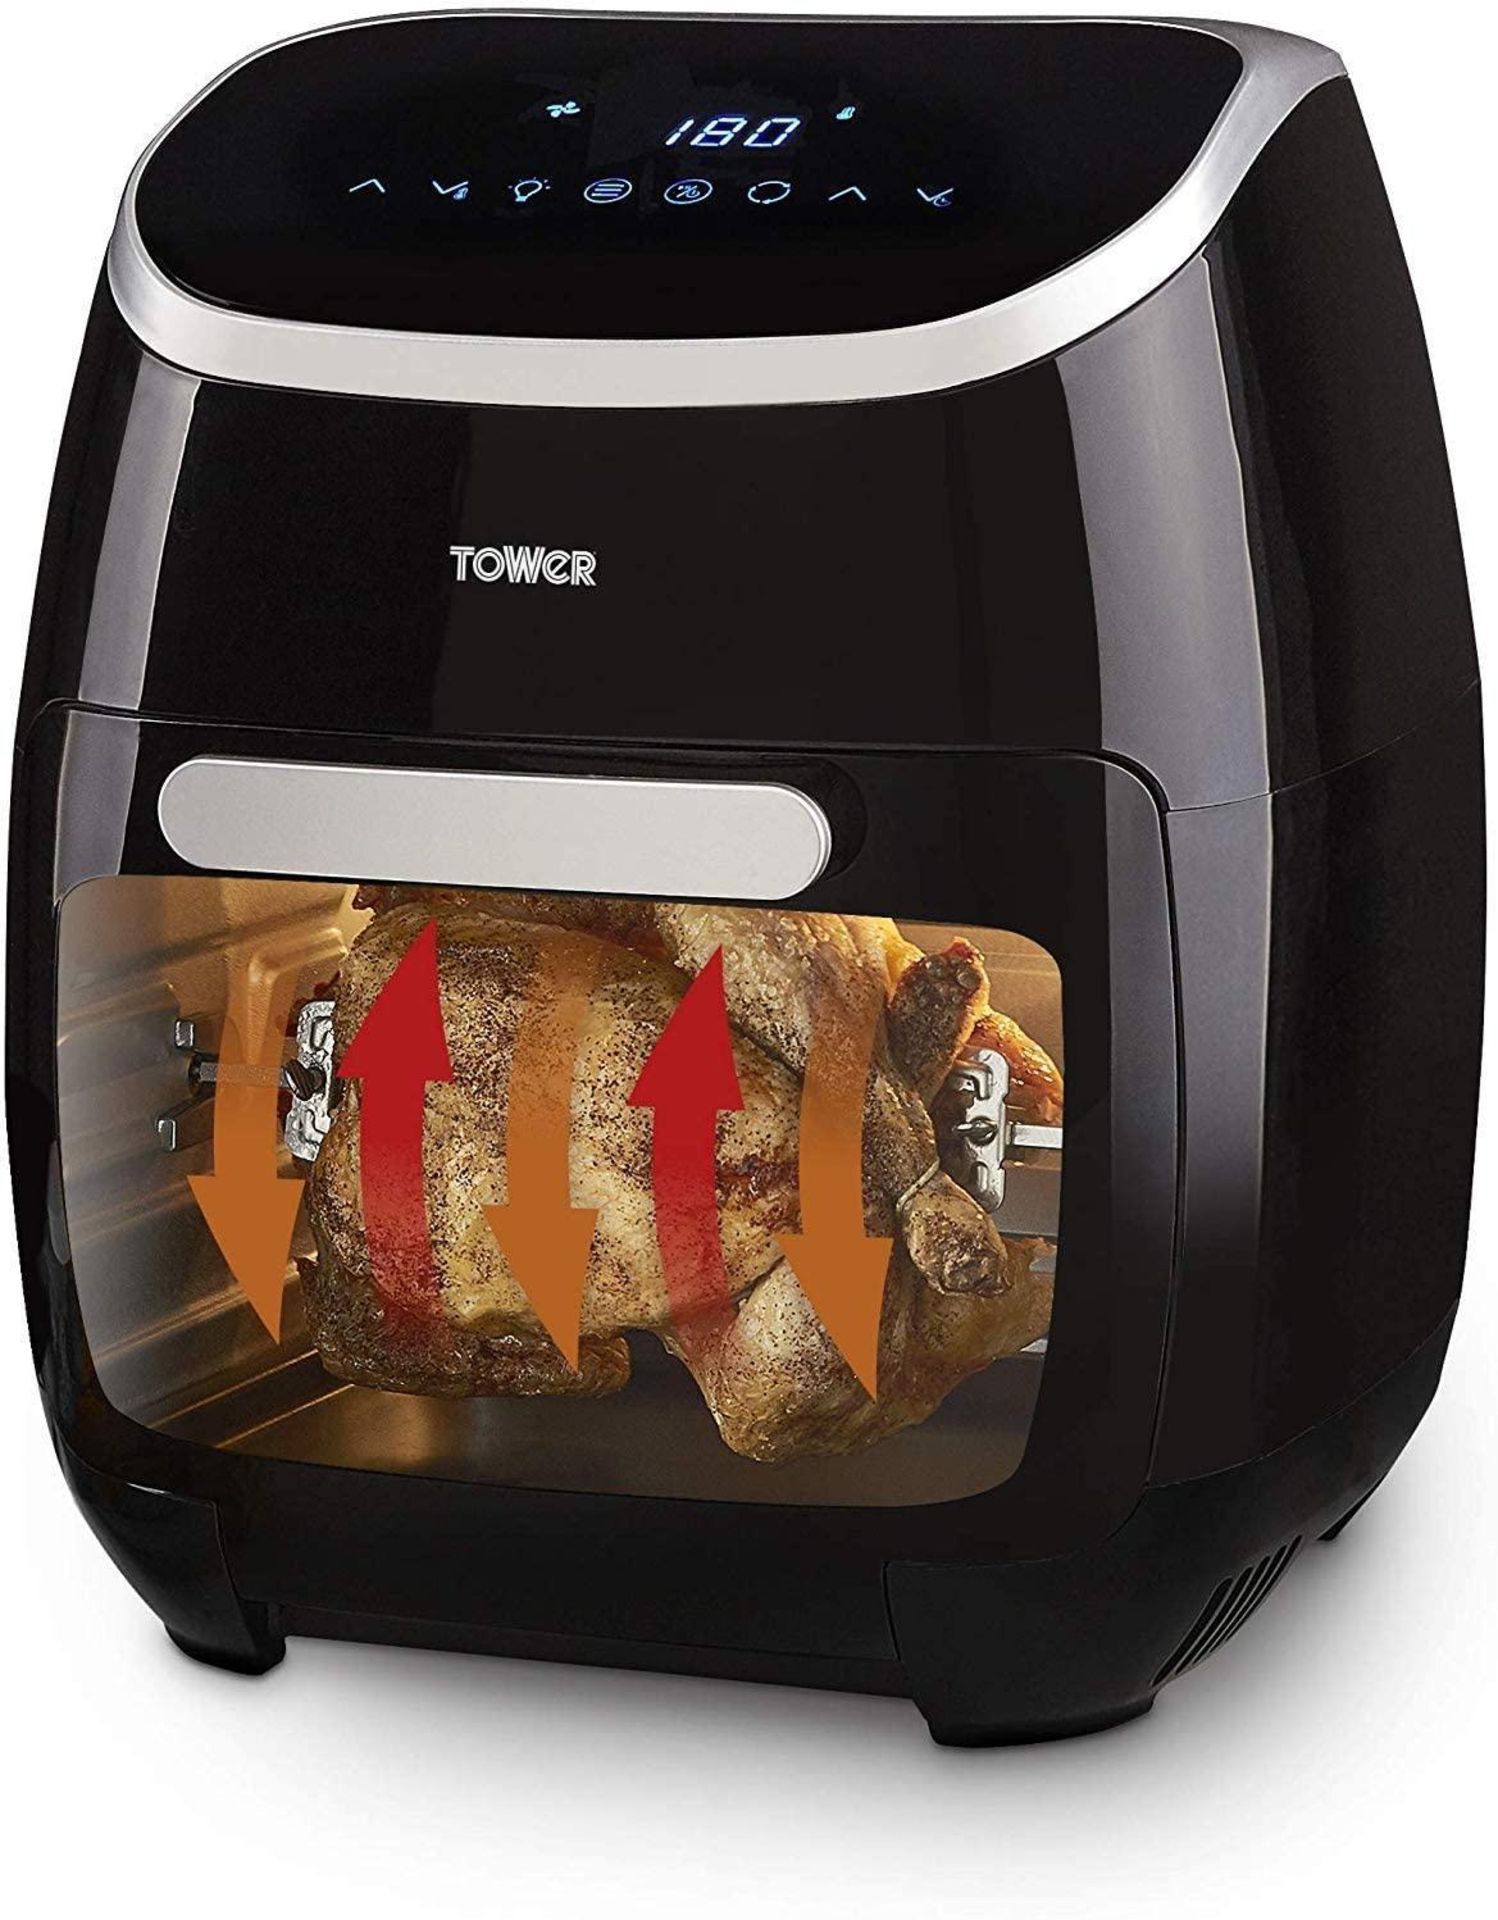 Tower T17039 Digital Air Fryer Oven, 11 Litre, Digital Display with 60 Minute Timer £86.99 RRP